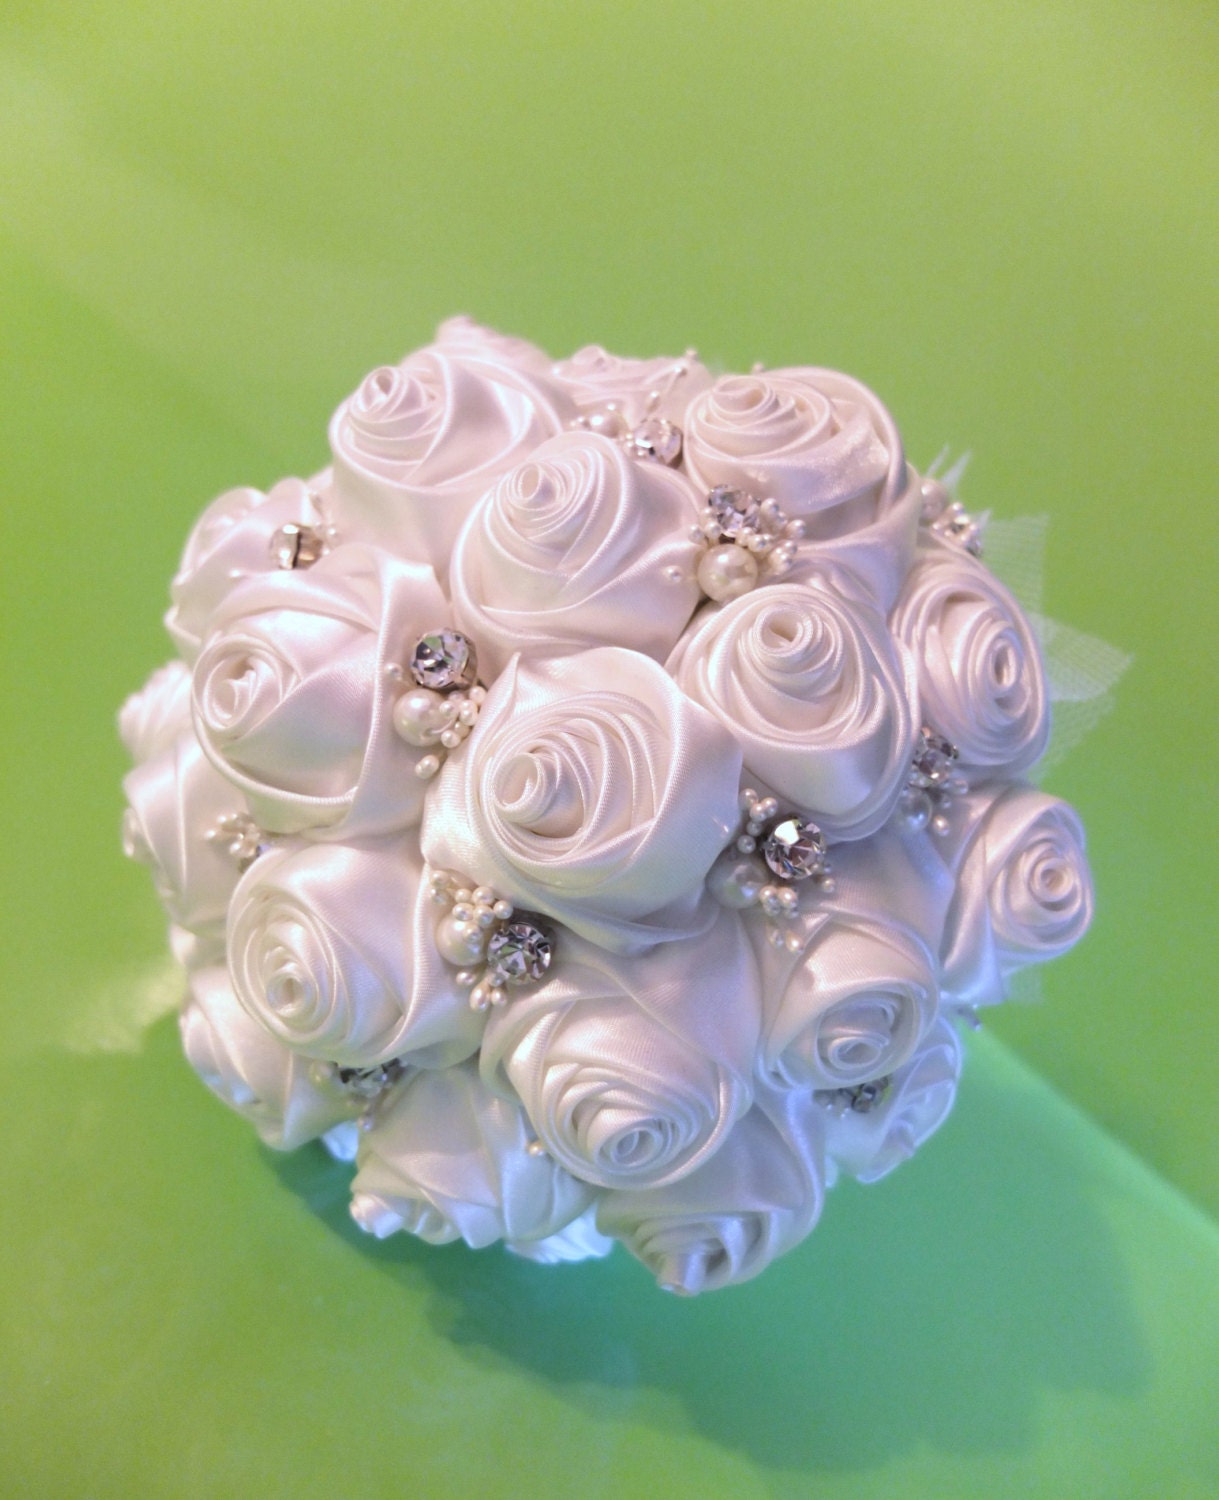 Handmade Ribbon Rose Bouquet- White rose accented with rhinestone (Large, 9 inch)